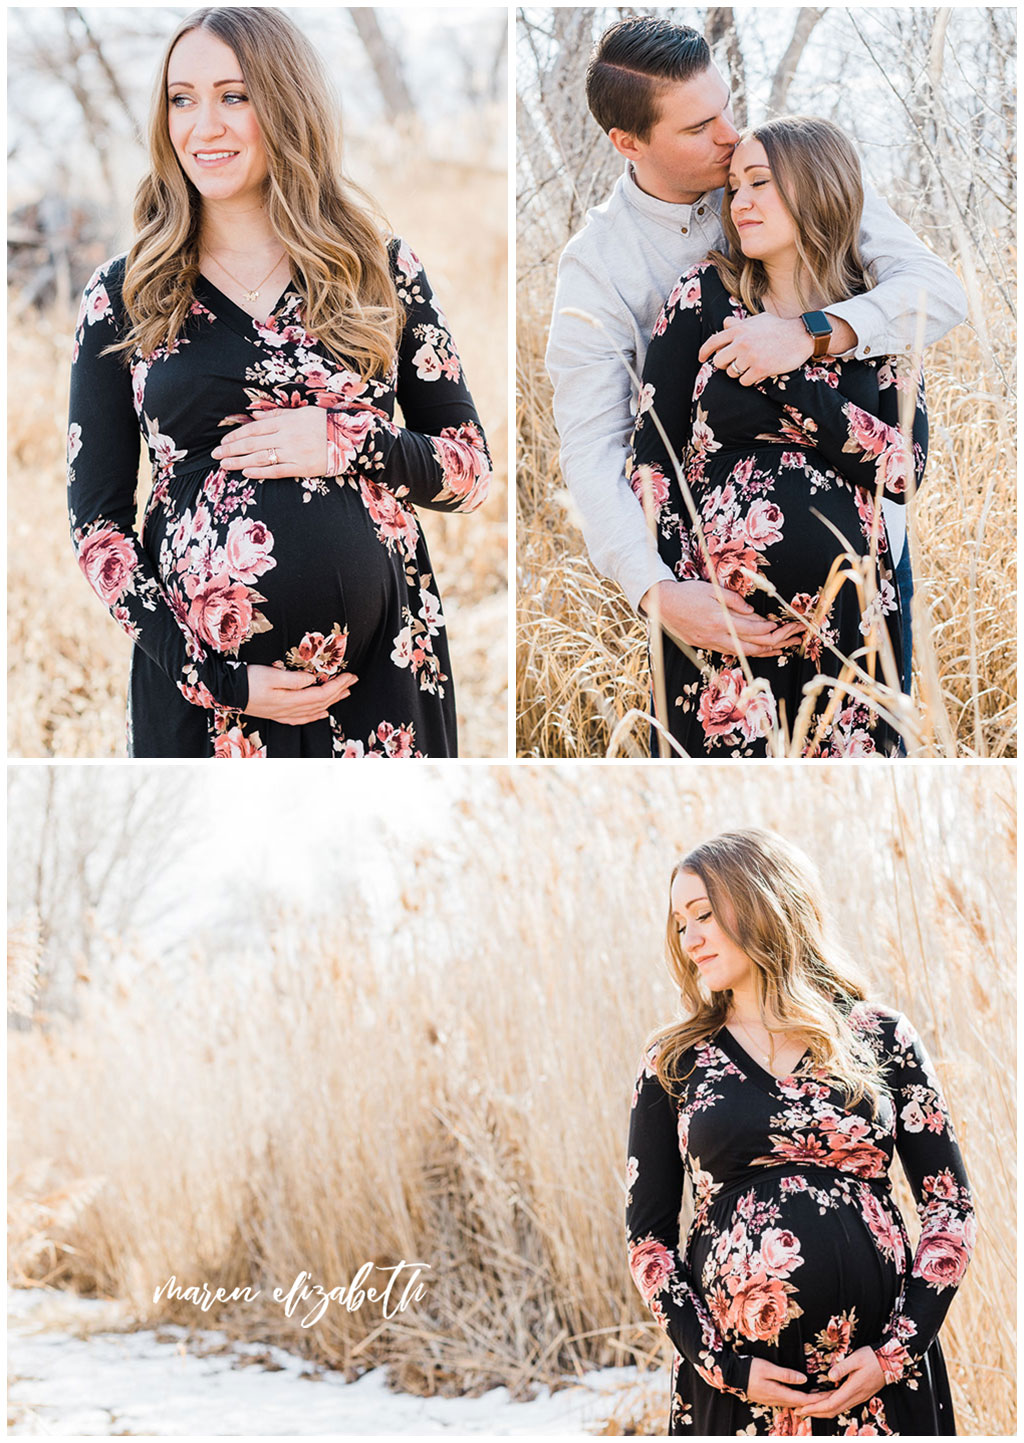 Why You Deserve a Maternity Session